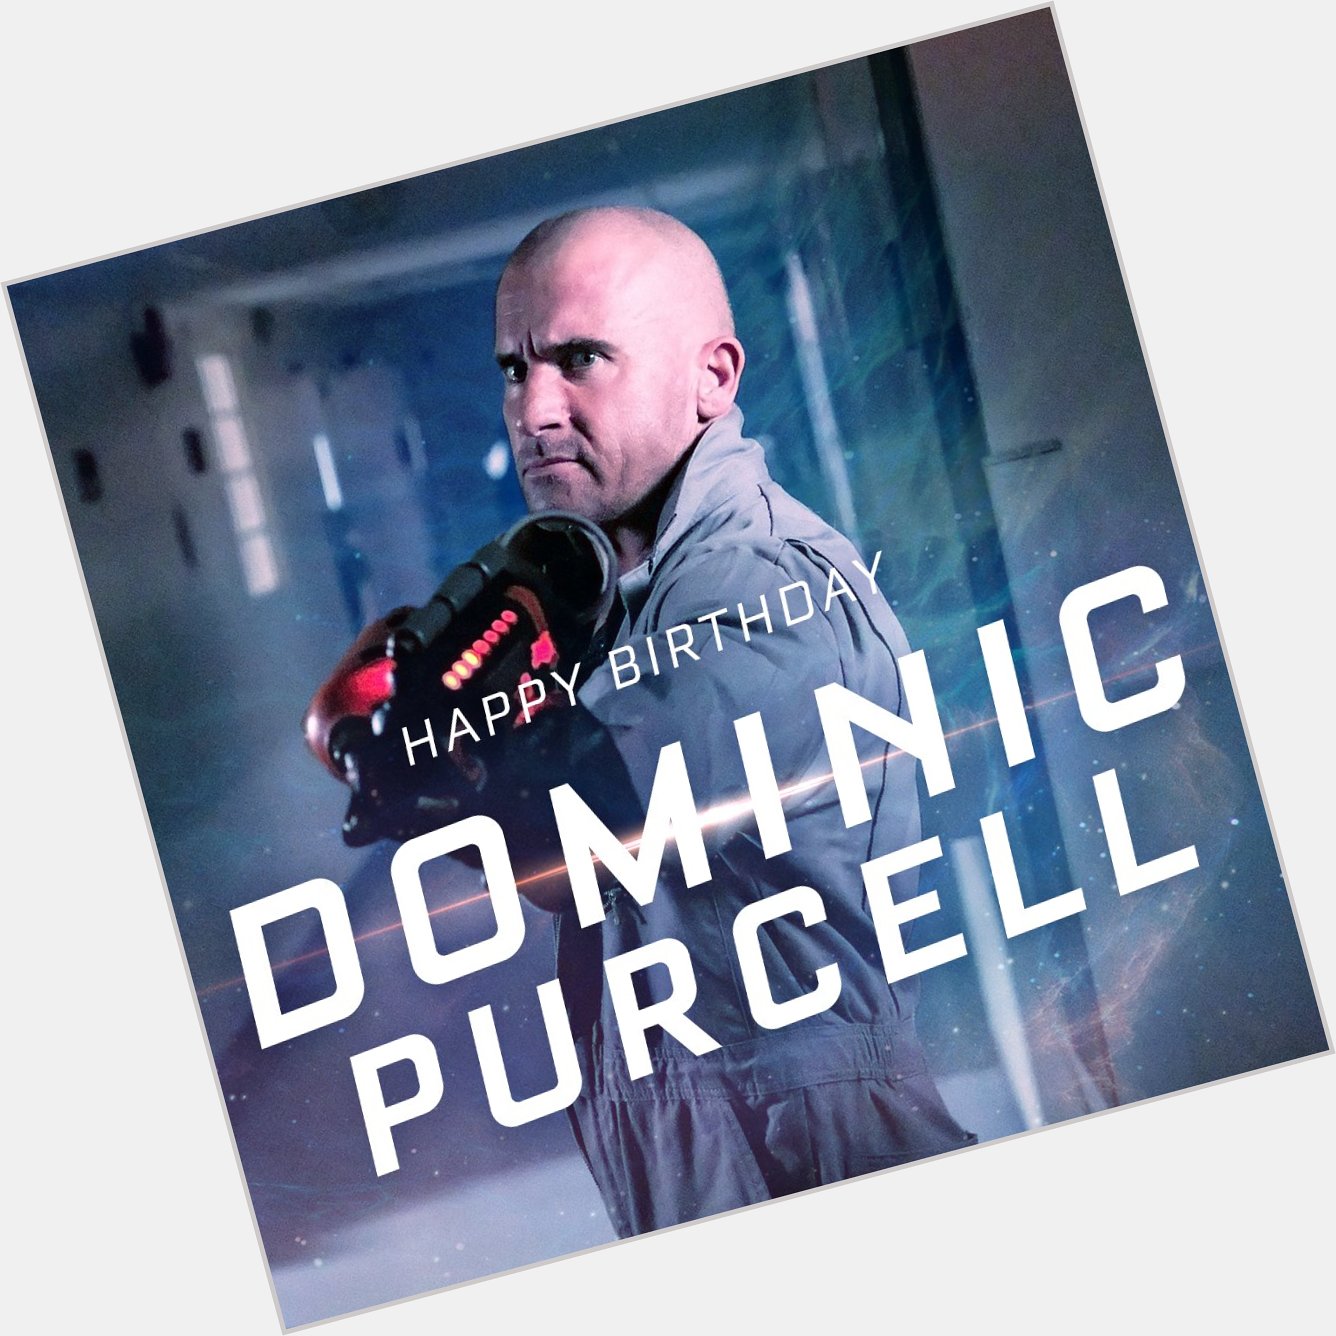 He always brings the heat. Happy Birthday, Dominic Purcell! 